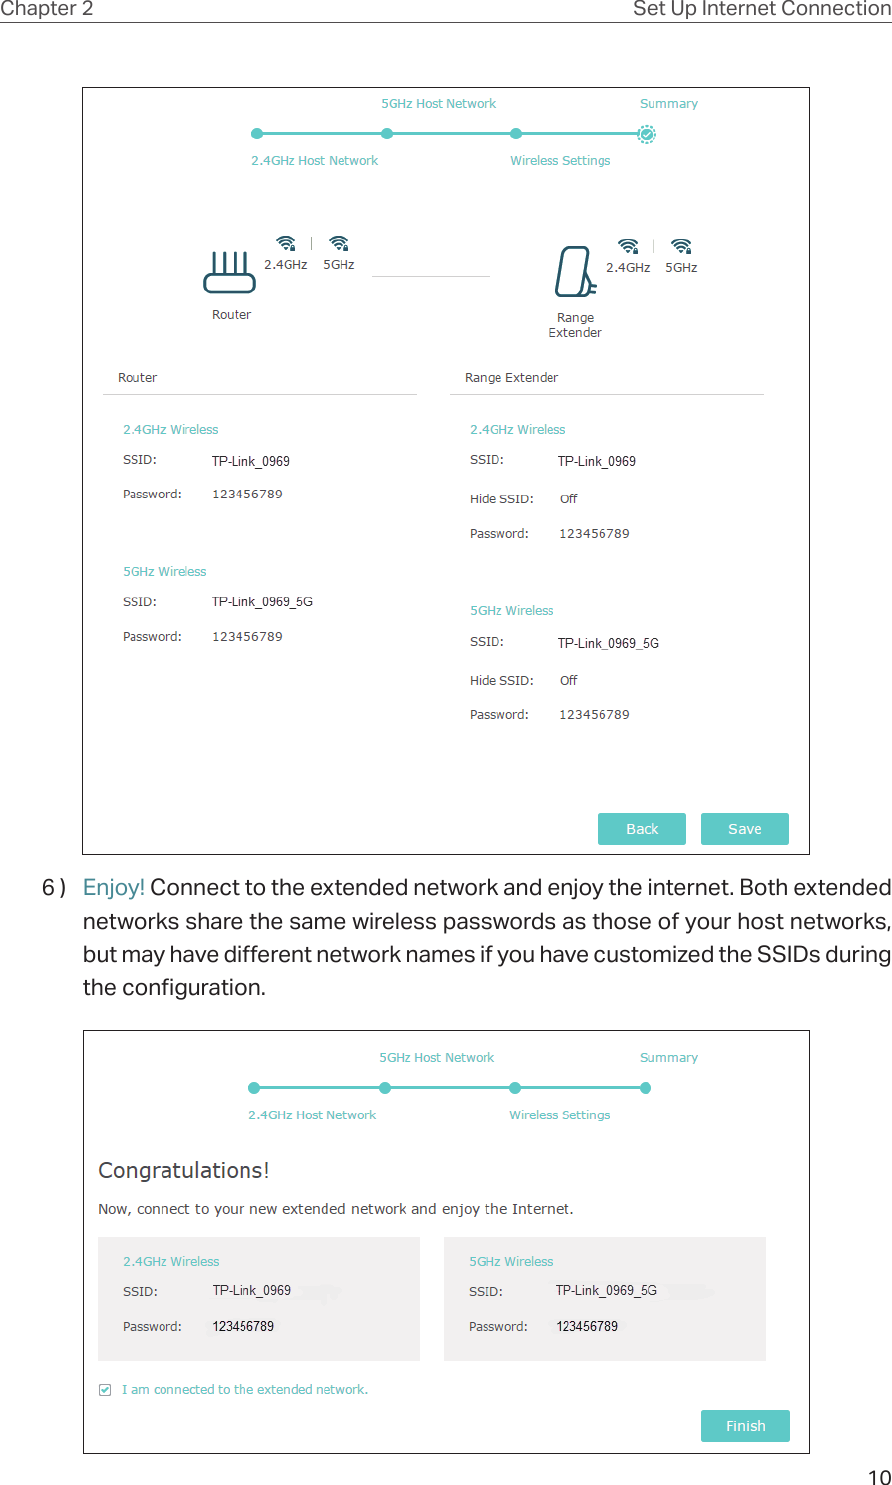 10Chapter 2 Set Up Internet Connection6 )  Enjoy! Connect to the extended network and enjoy the internet. Both extended networks share the same wireless passwords as those of your host networks, but may have different network names if you have customized the SSIDs during the configuration.